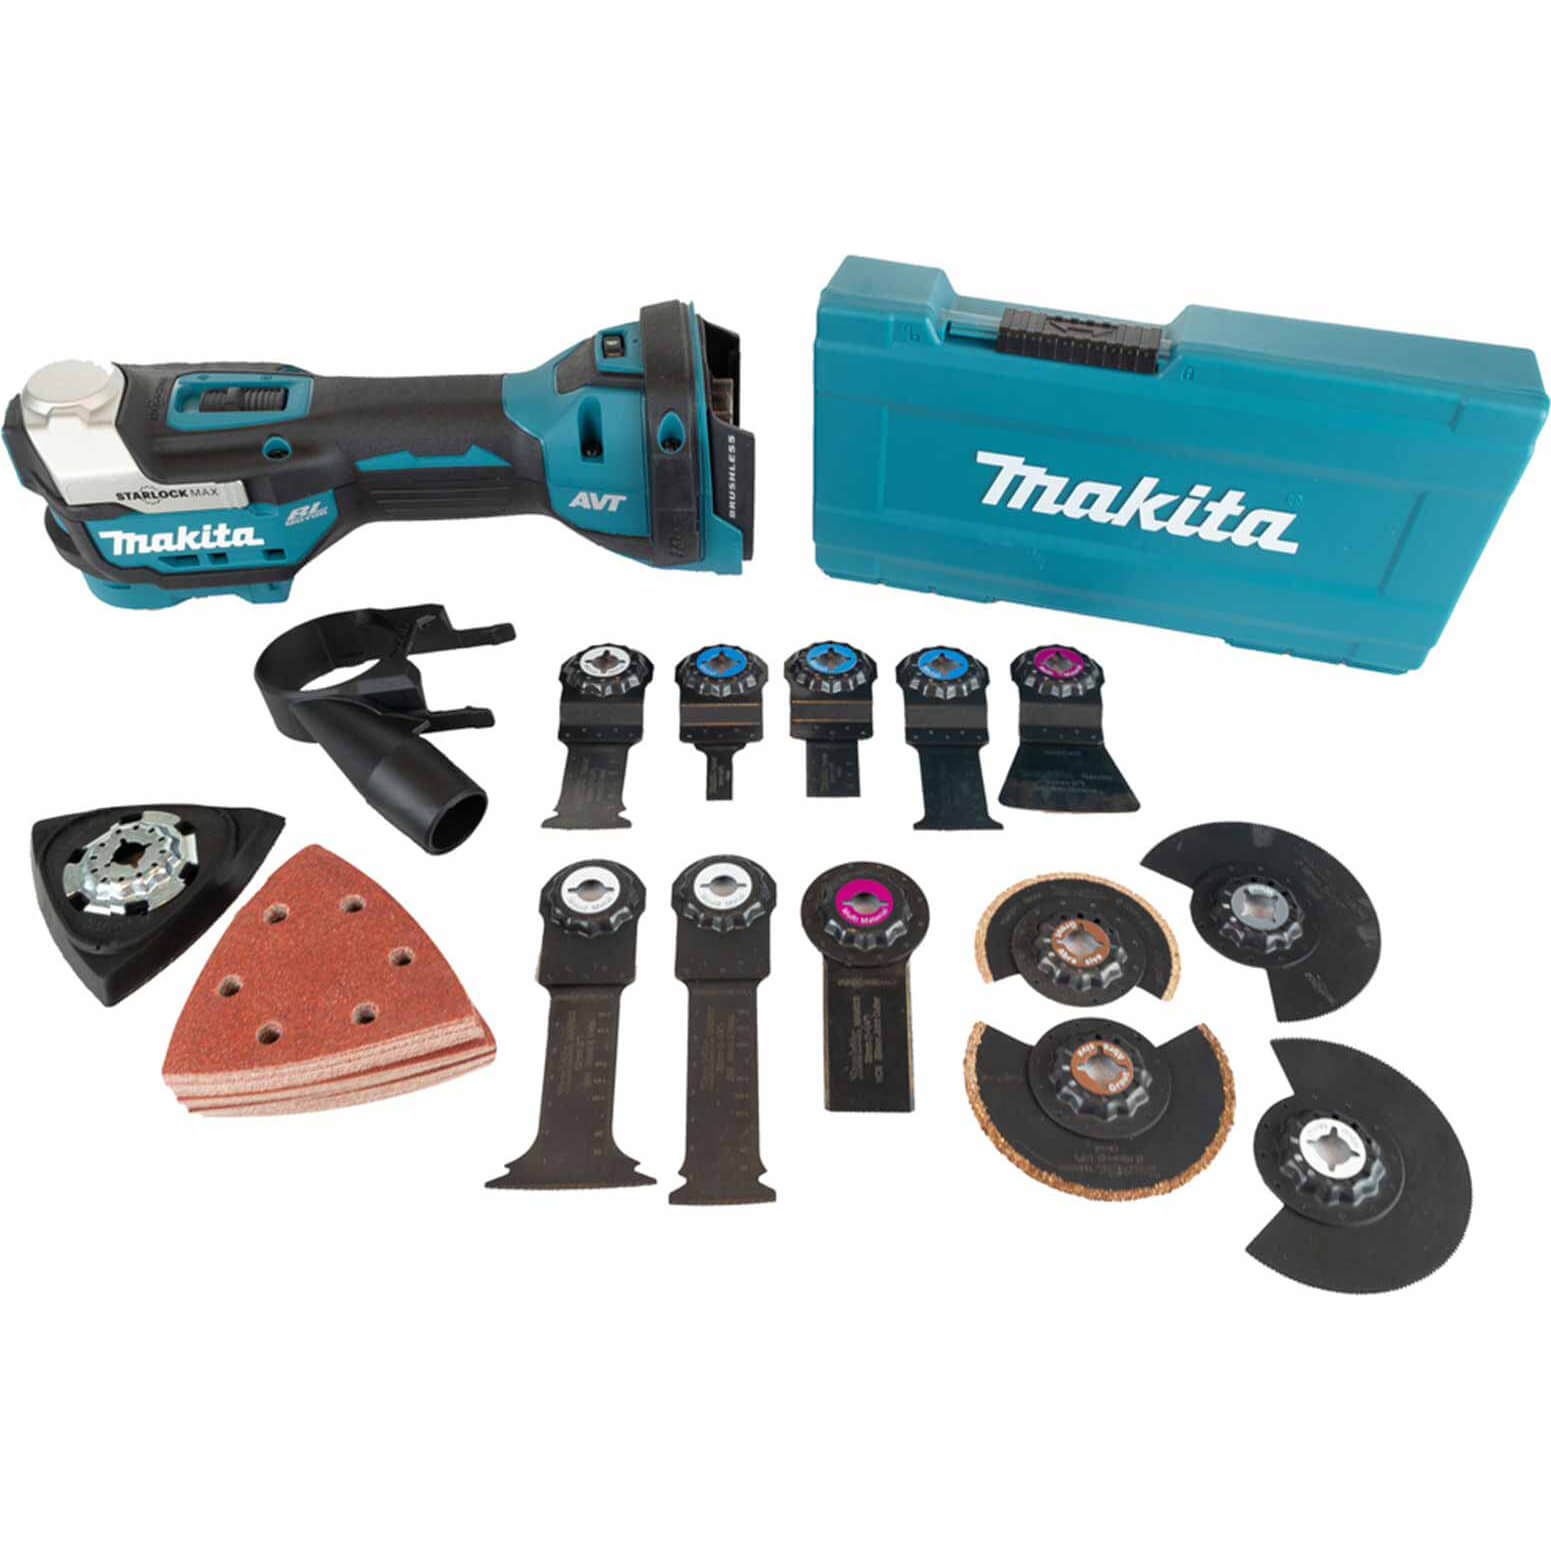 Photo of Makita Dtm52zx2 18v Lxt Cordless Brushless Oscillating Multi Tool And Accessories No Batteries No Charger No Case